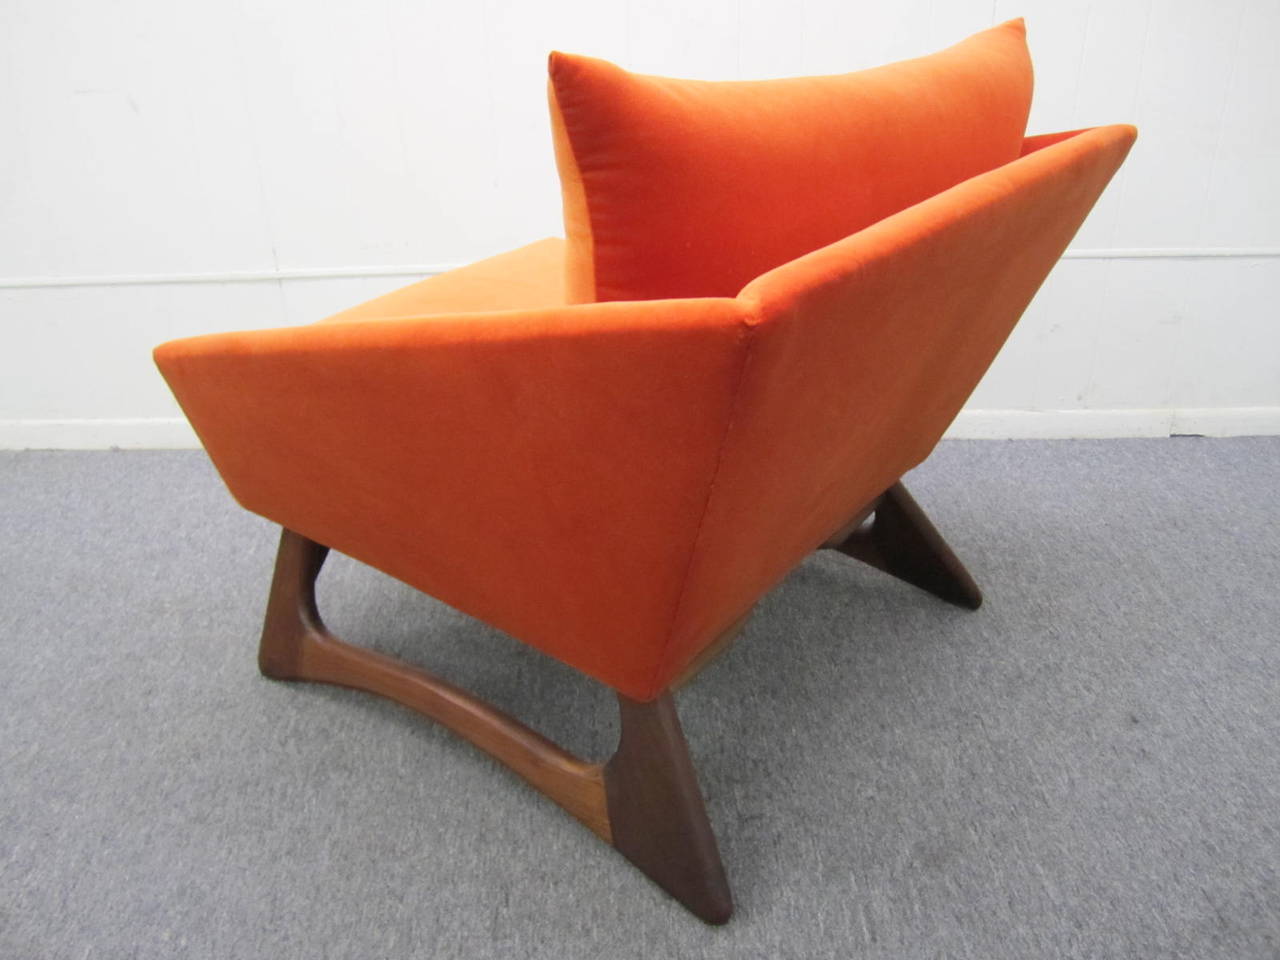 Simply scrumptious pair of Adrian Pearsall angular and sculptural lounge chair. I really feel like I can not fully describe the deliciousness of this rare pair of chairs by Mr. Pearsall. One is newly upholstered in a high-end citrus orange velvet